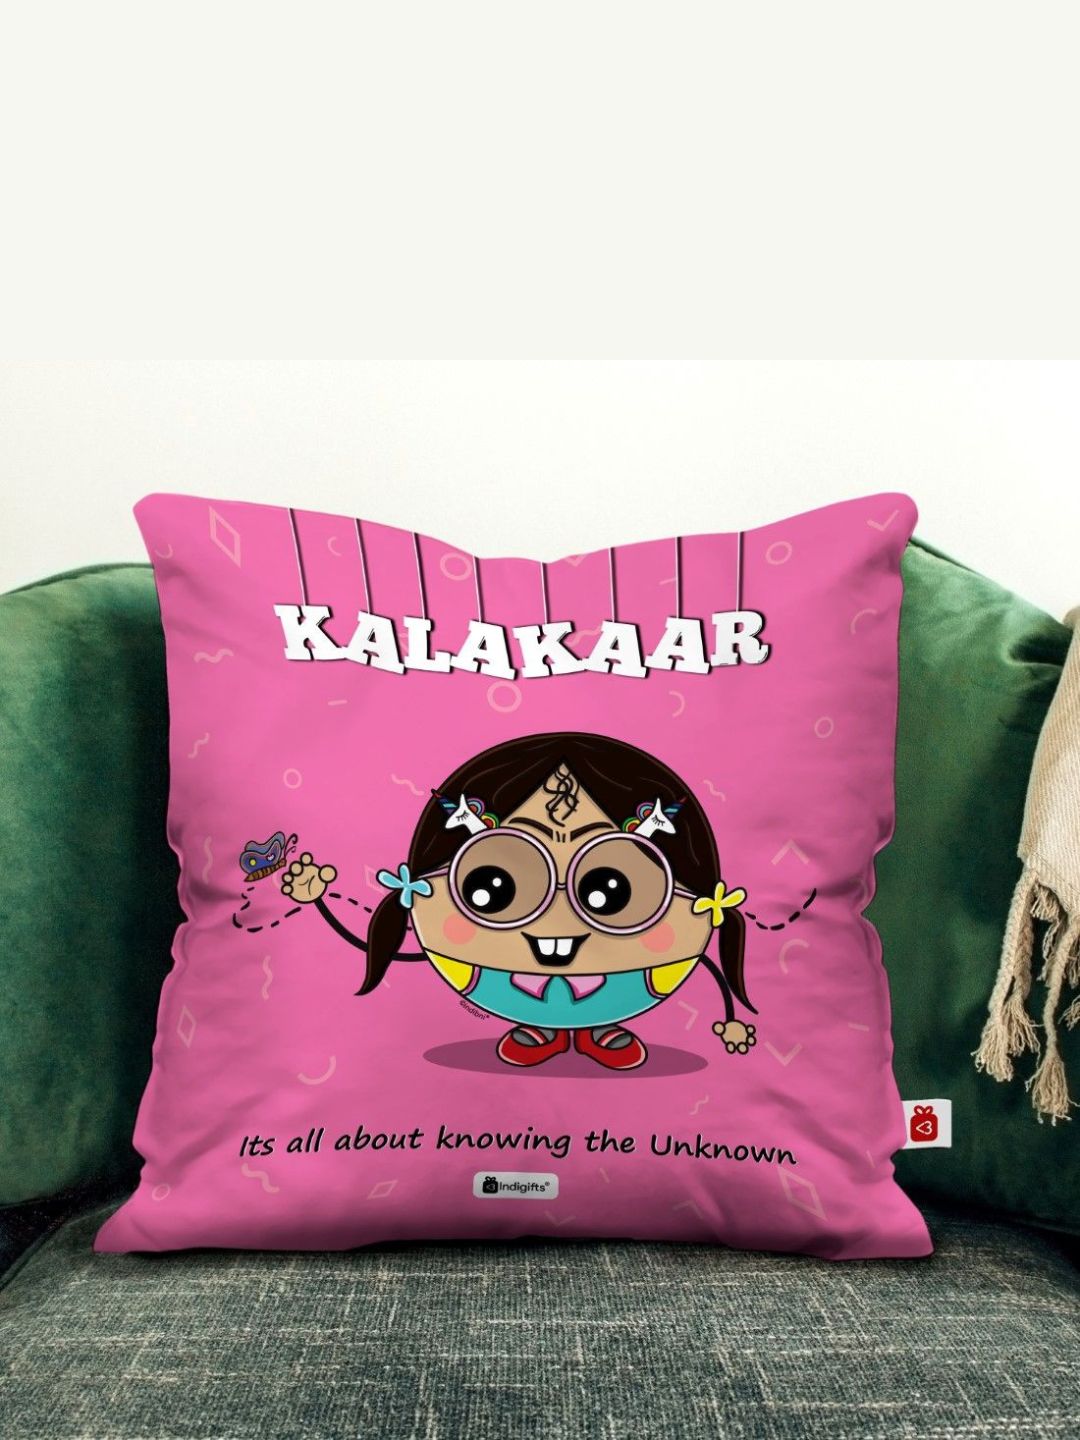 Indigifts Friendship Day for Best Friend | Kalakaar Printed Satin Cushion Cover with Filler | Rakhi for Sister, Bestie-Roommate-Hostel Friends, Friend Birthday | Pink, Cushion – 12″ x 12″